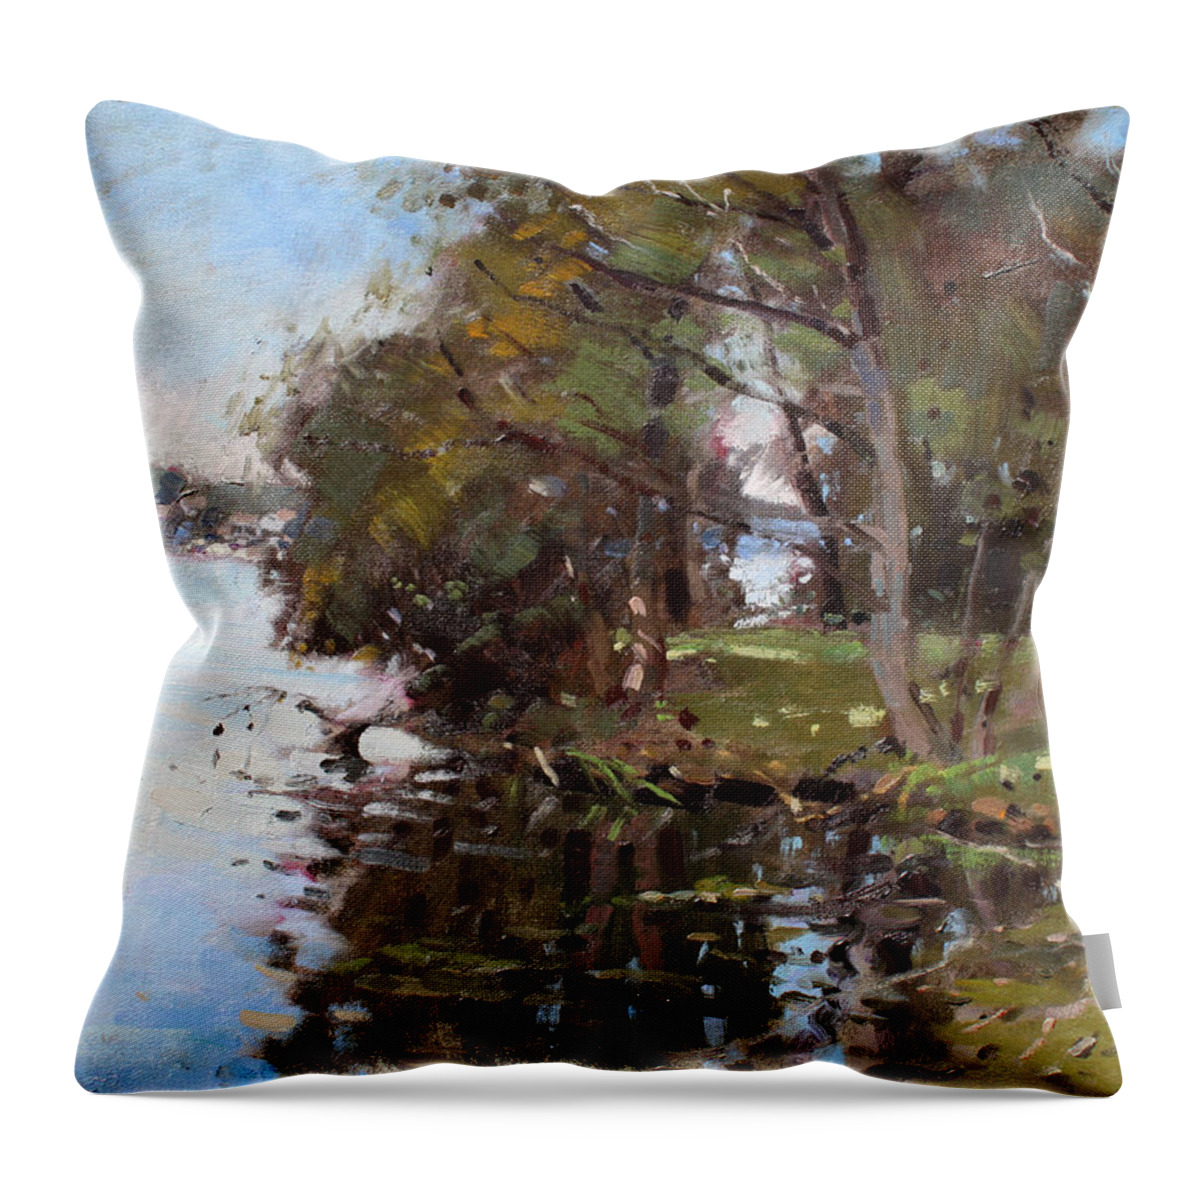 Marines Memorial Park Throw Pillow featuring the painting Marines Memorial Park by Ylli Haruni